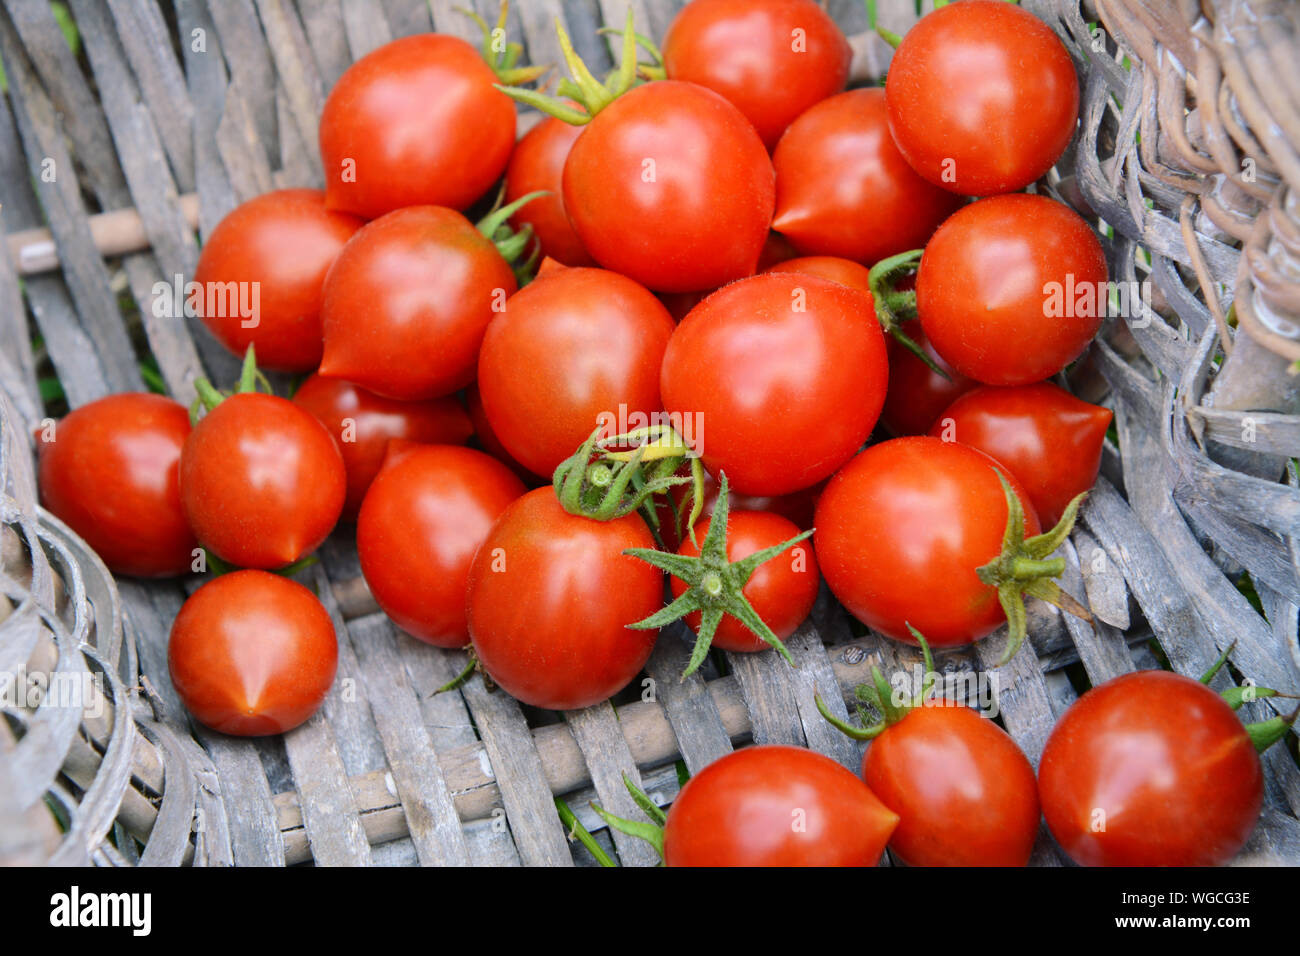 Freshly picked ripe red tomatoes from an allotment, piled in the corner of a woven basket Stock Photo